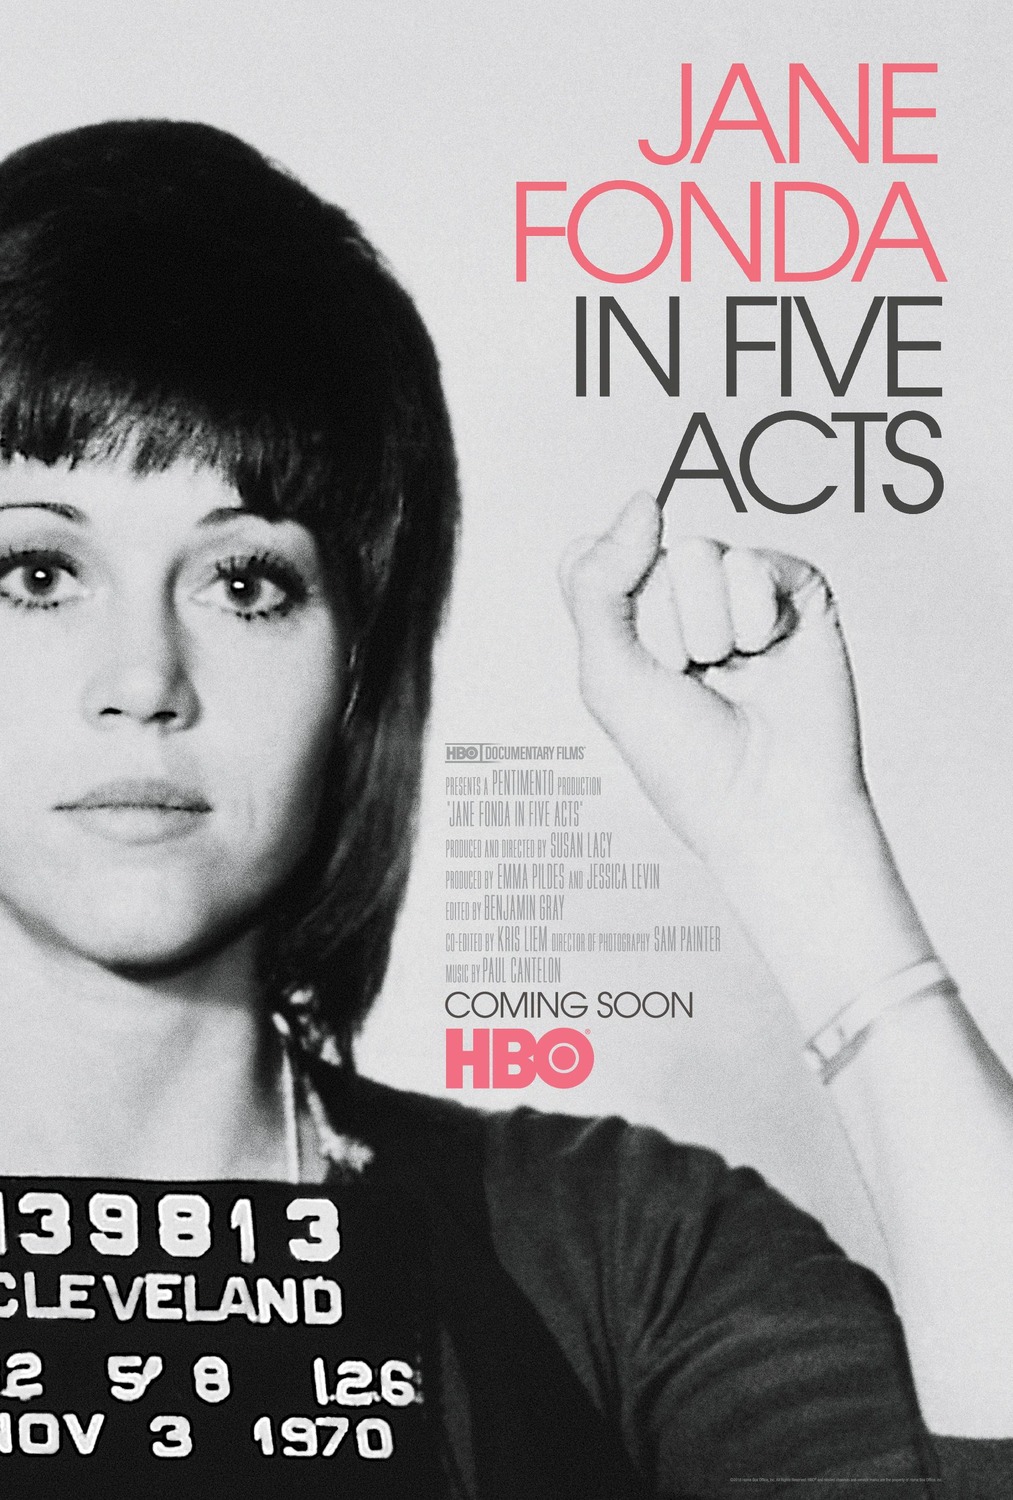 Extra Large TV Poster Image for Jane Fonda in Five Acts 